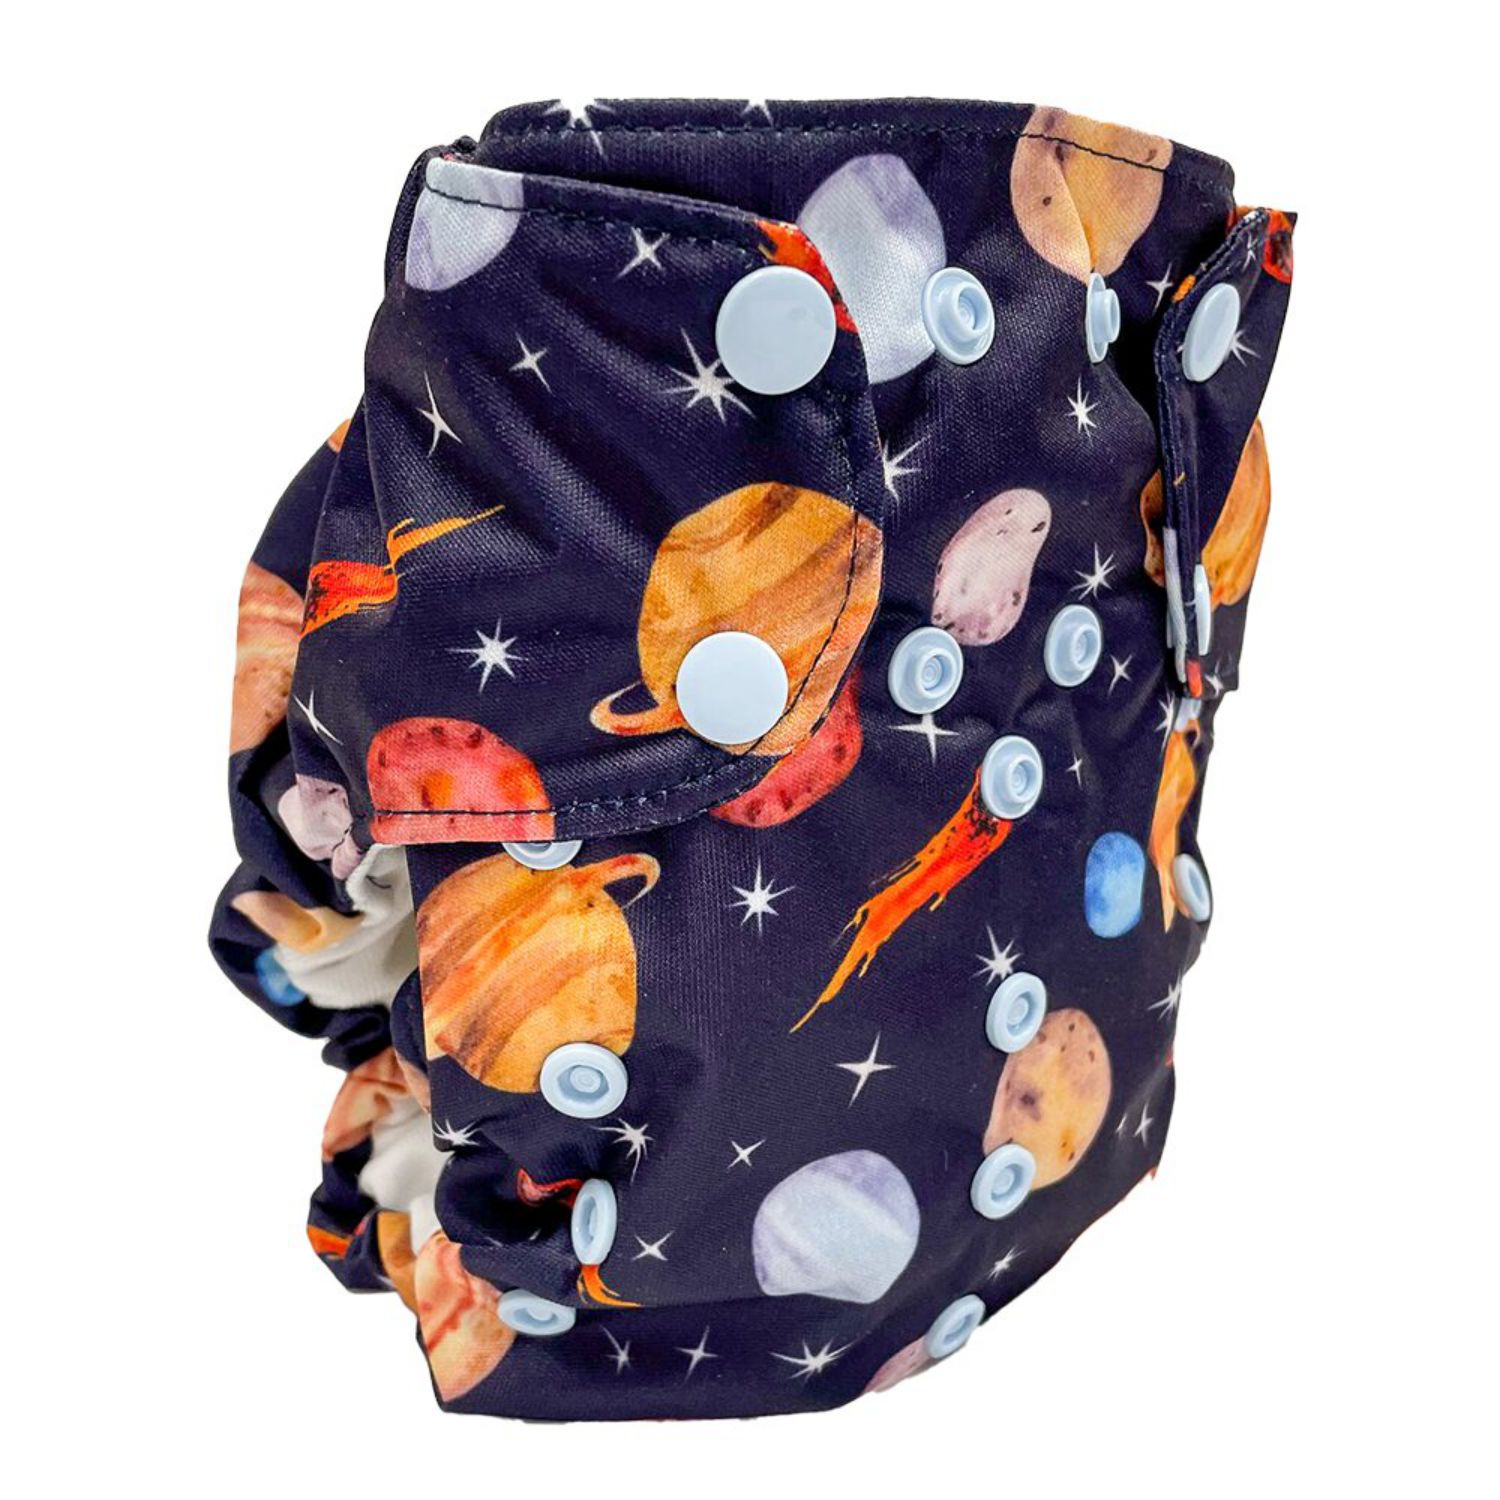 Smart Bottoms Dream Diaper 2.0 AIO One Size Pattern: Cosmos